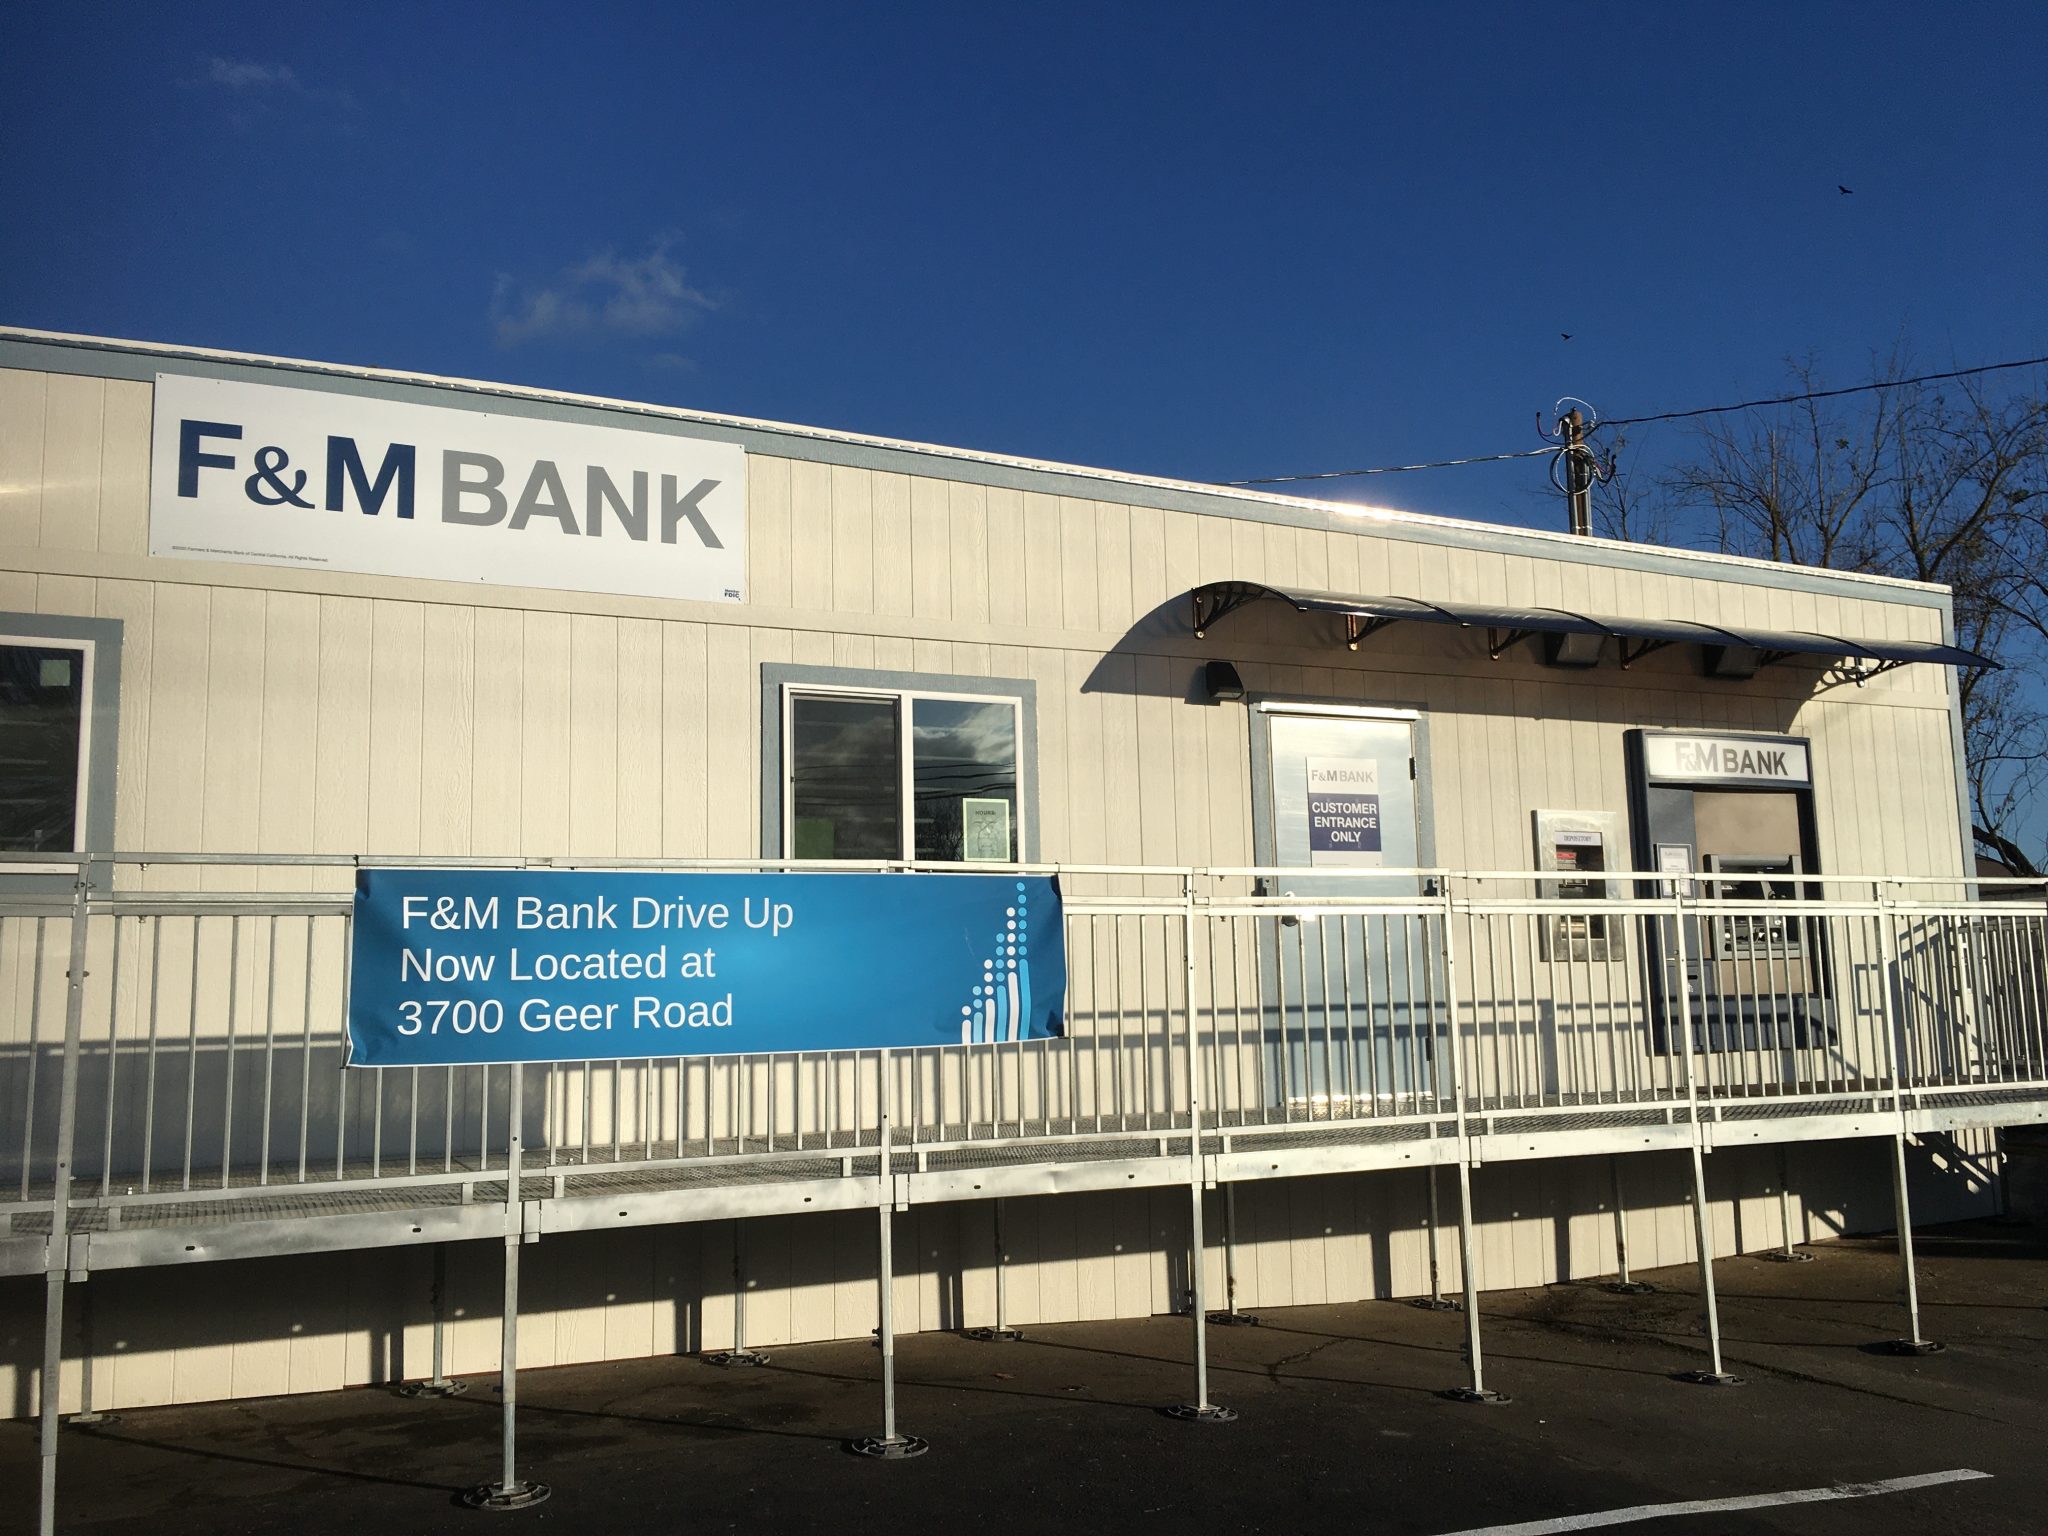 F&M Bank Partners with Mobile Modular (formerly Design Space Modular Buildings) to Build a Mobile Bank